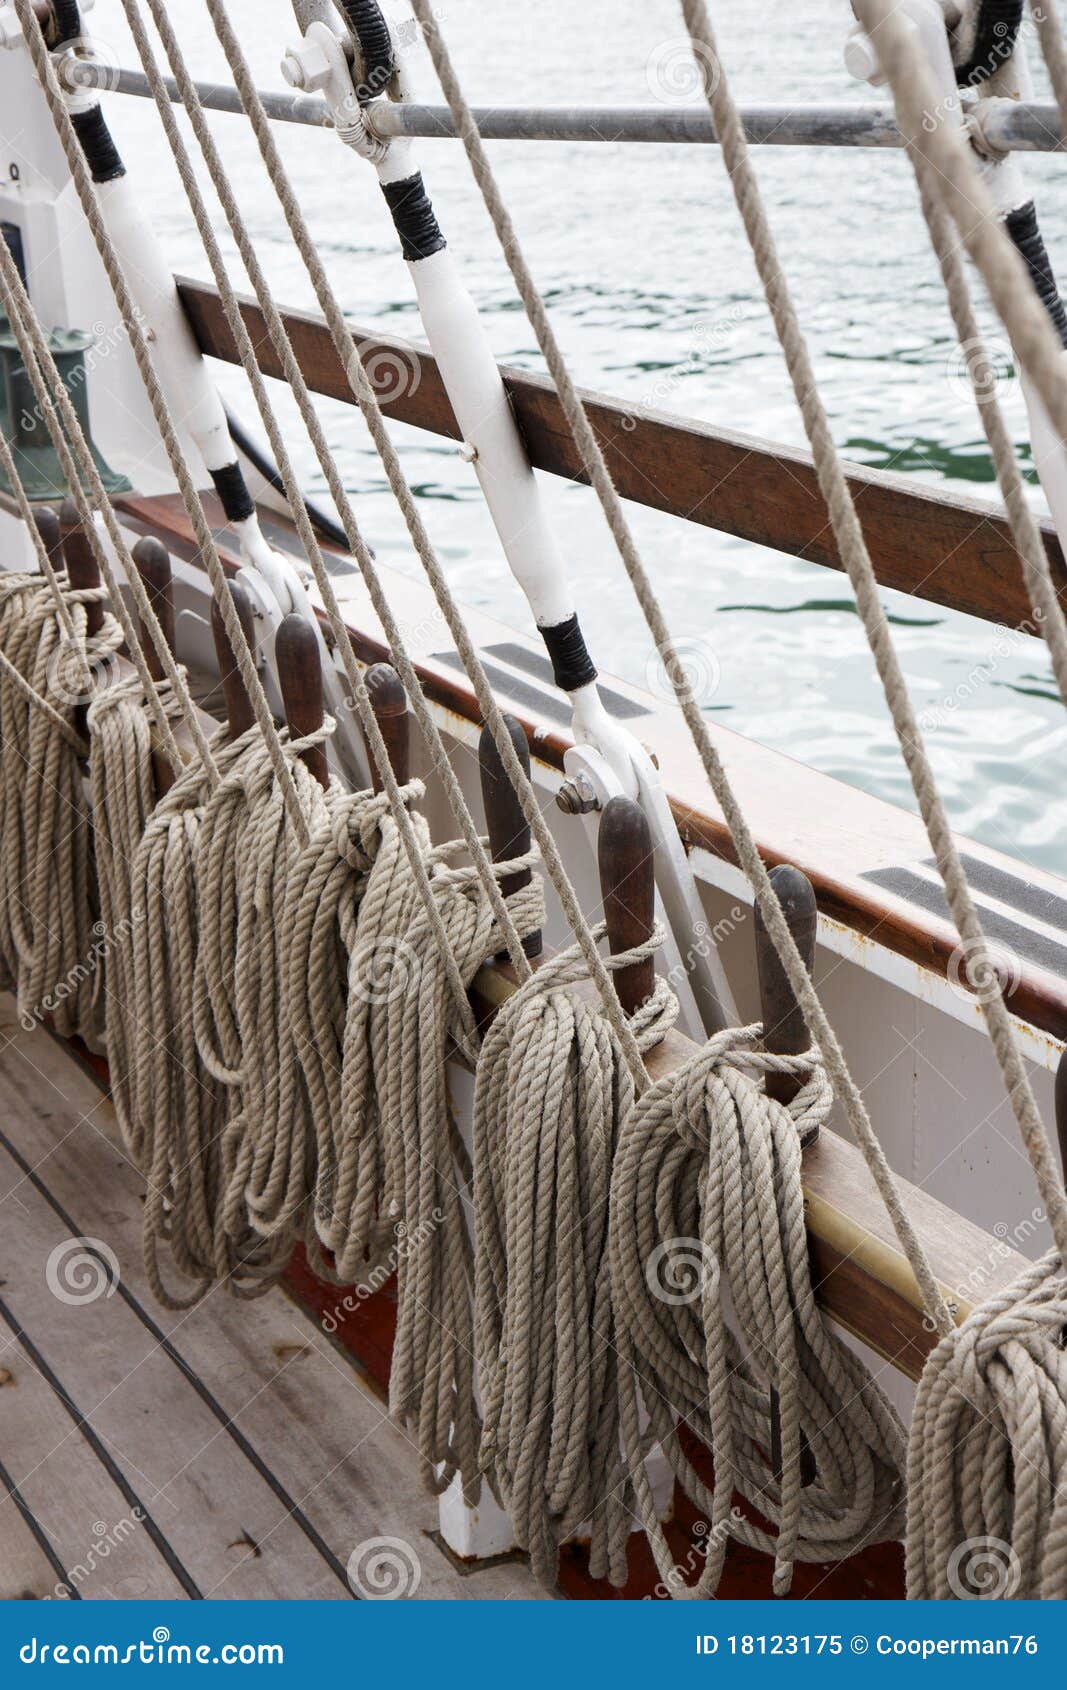 Ropes and Rigging on an Old Sail Ship Stock Image - Image of bundle, mast:  18123175